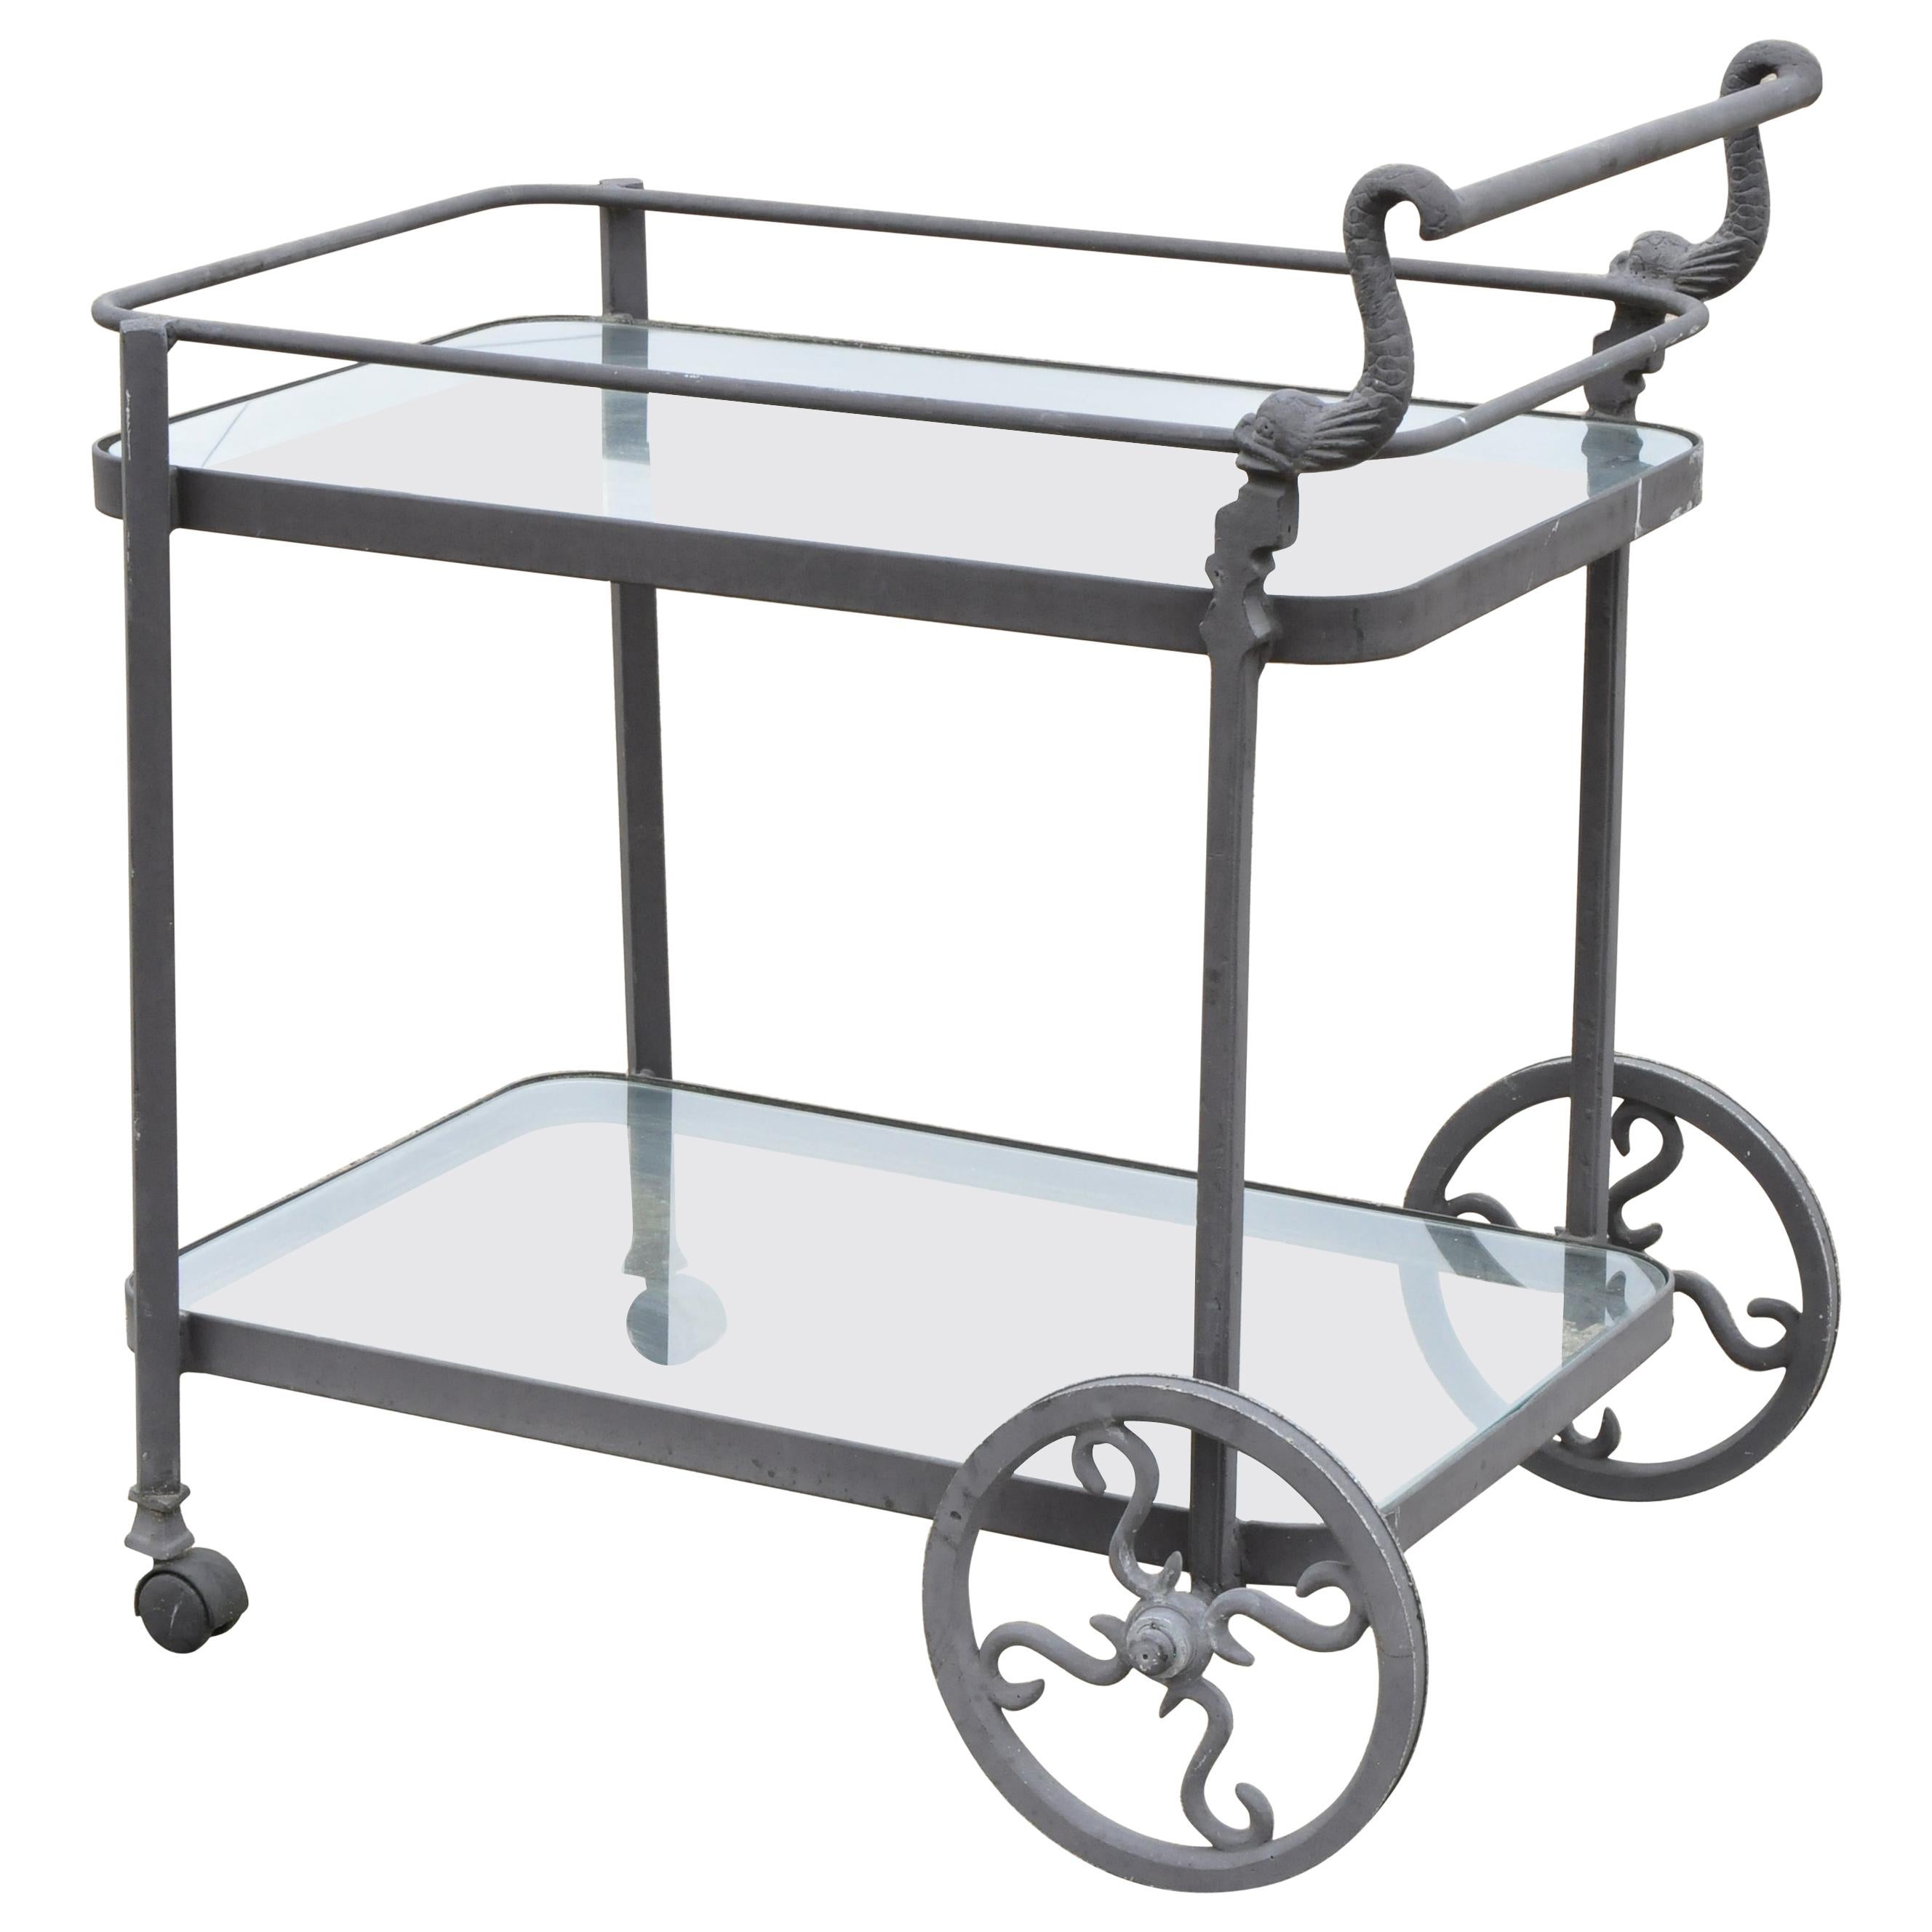 Cast Aluminum 2-Tier Rolling Bar Tea Cart Server Table with Fish Dolphin Handle